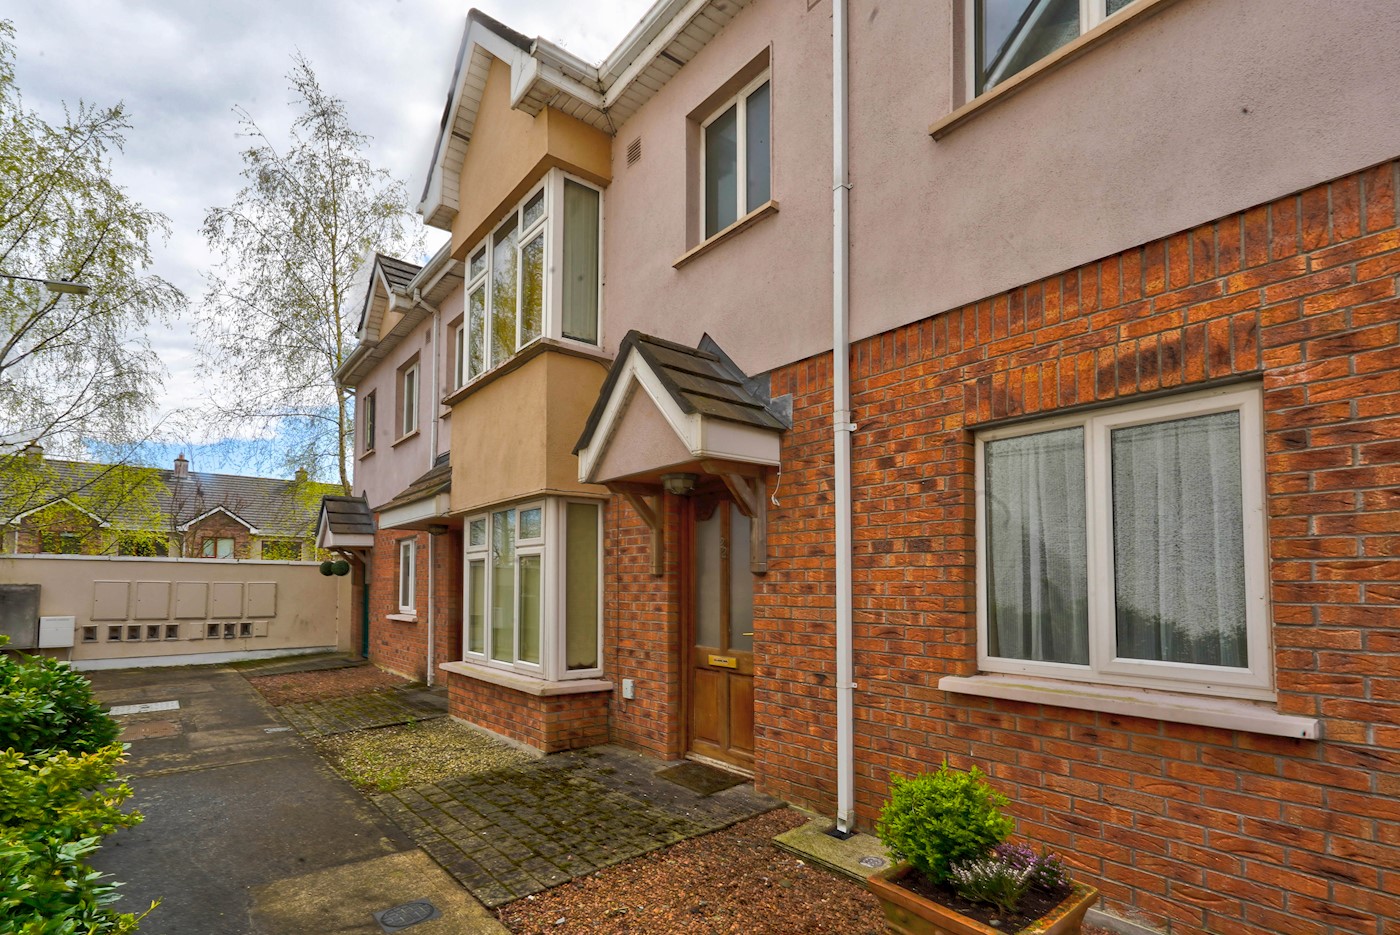 Apartment 23, Tanner Hall, Athy Road, Carlow Town, Co. Carlow, R93Y710 1/13